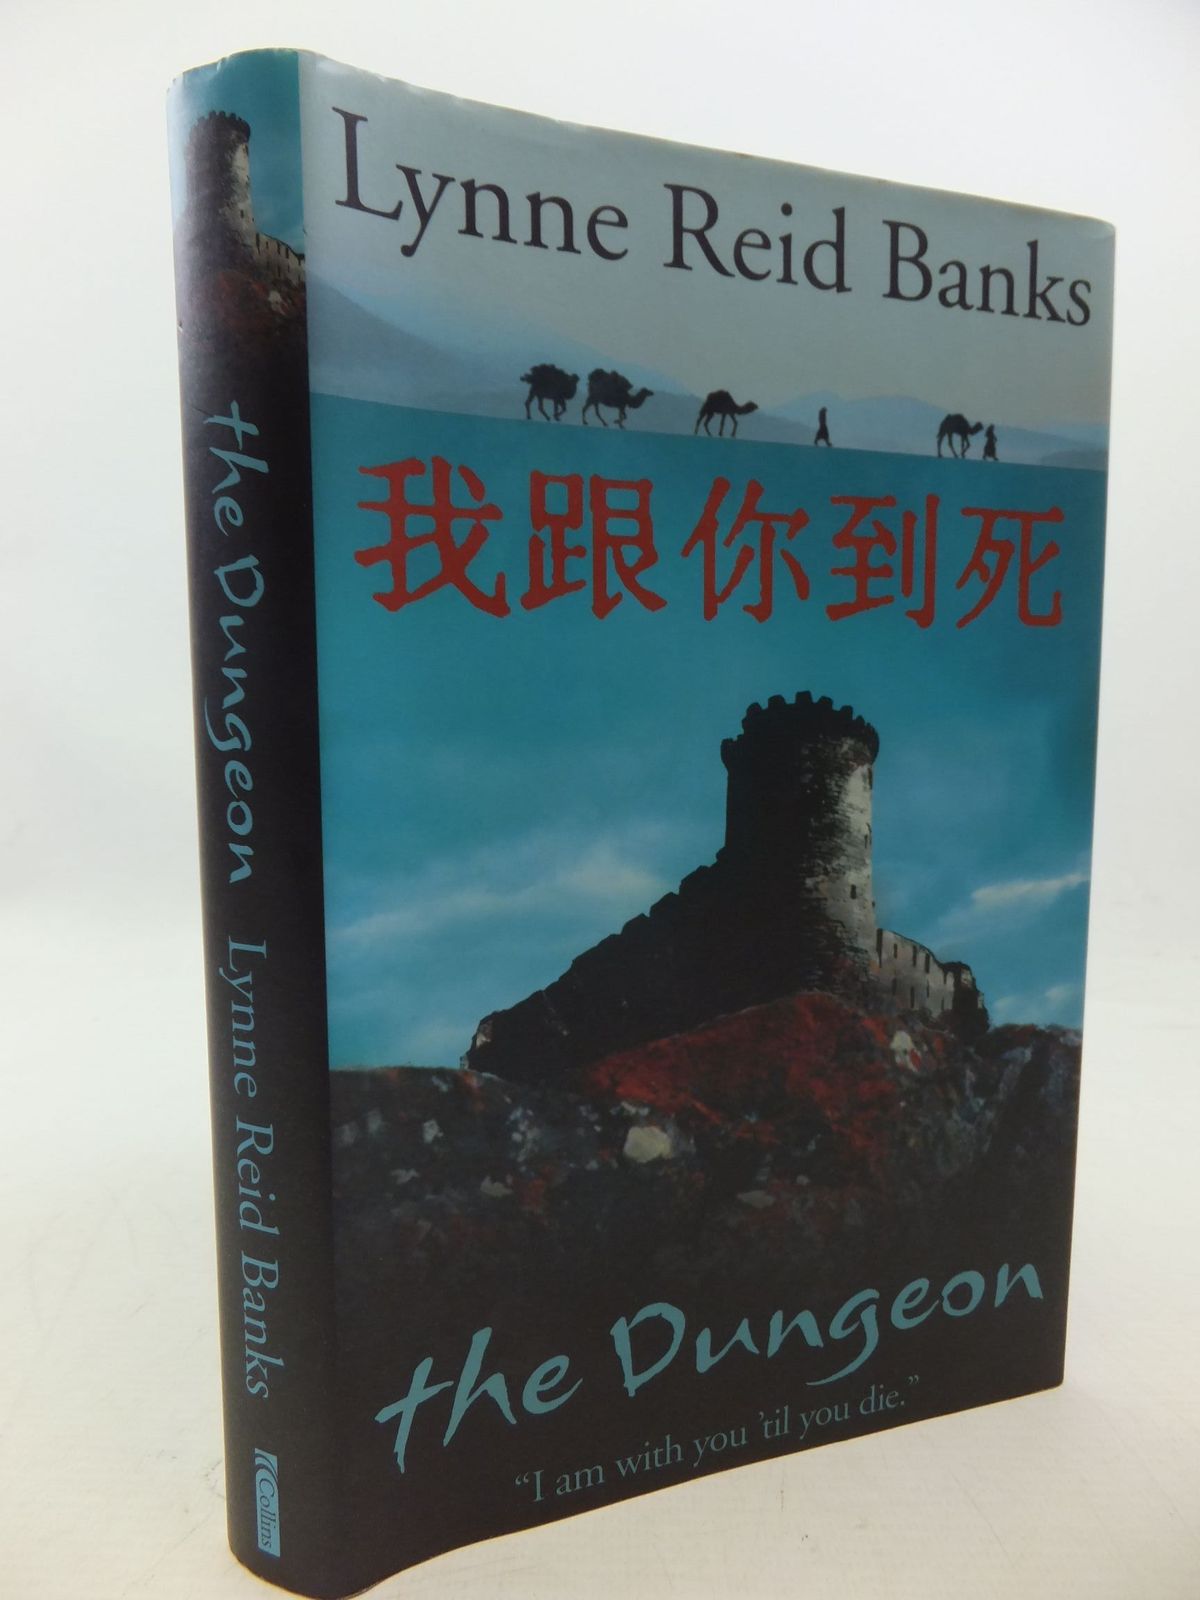 Photo of THE DUNGEON written by Banks, Lynne Reid published by Collins (STOCK CODE: 1207935)  for sale by Stella & Rose's Books